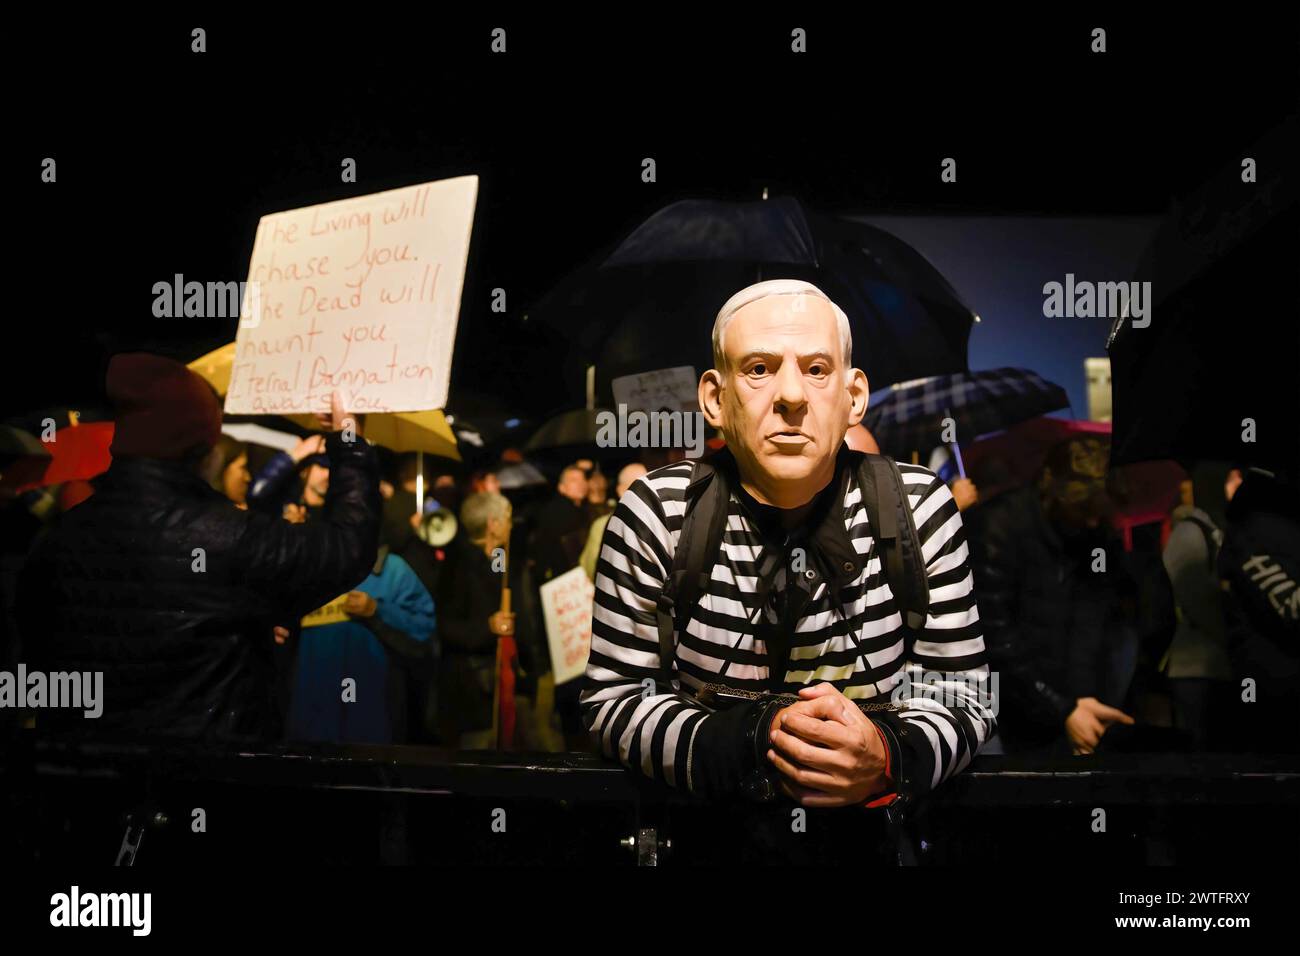 Tel Aviv, Israel. 23rd Dec, 2023. A protestor in a convict uniform wears a Benjamin Netanyahu mask next to a sign that reads Ã¬The living will chase you. The dead will haunt you. Eternal damnation awaits youÃ® during a demonstration attended by thousands under pouring rain calling for Prime Minister Benjamin Netanyahu ousting. Tel Aviv, Israel. Dec 23th 2023. (Matan Golan/SOPA Images).during the demonstration. Thousands of Israelis protest in the pouring rain calling for Prime Minister Benjamin Netanyahu's ousting. (Credit Image: © Matan Golan/SOPA Images via ZUMA Press Wire) EDITORIAL U Stock Photo